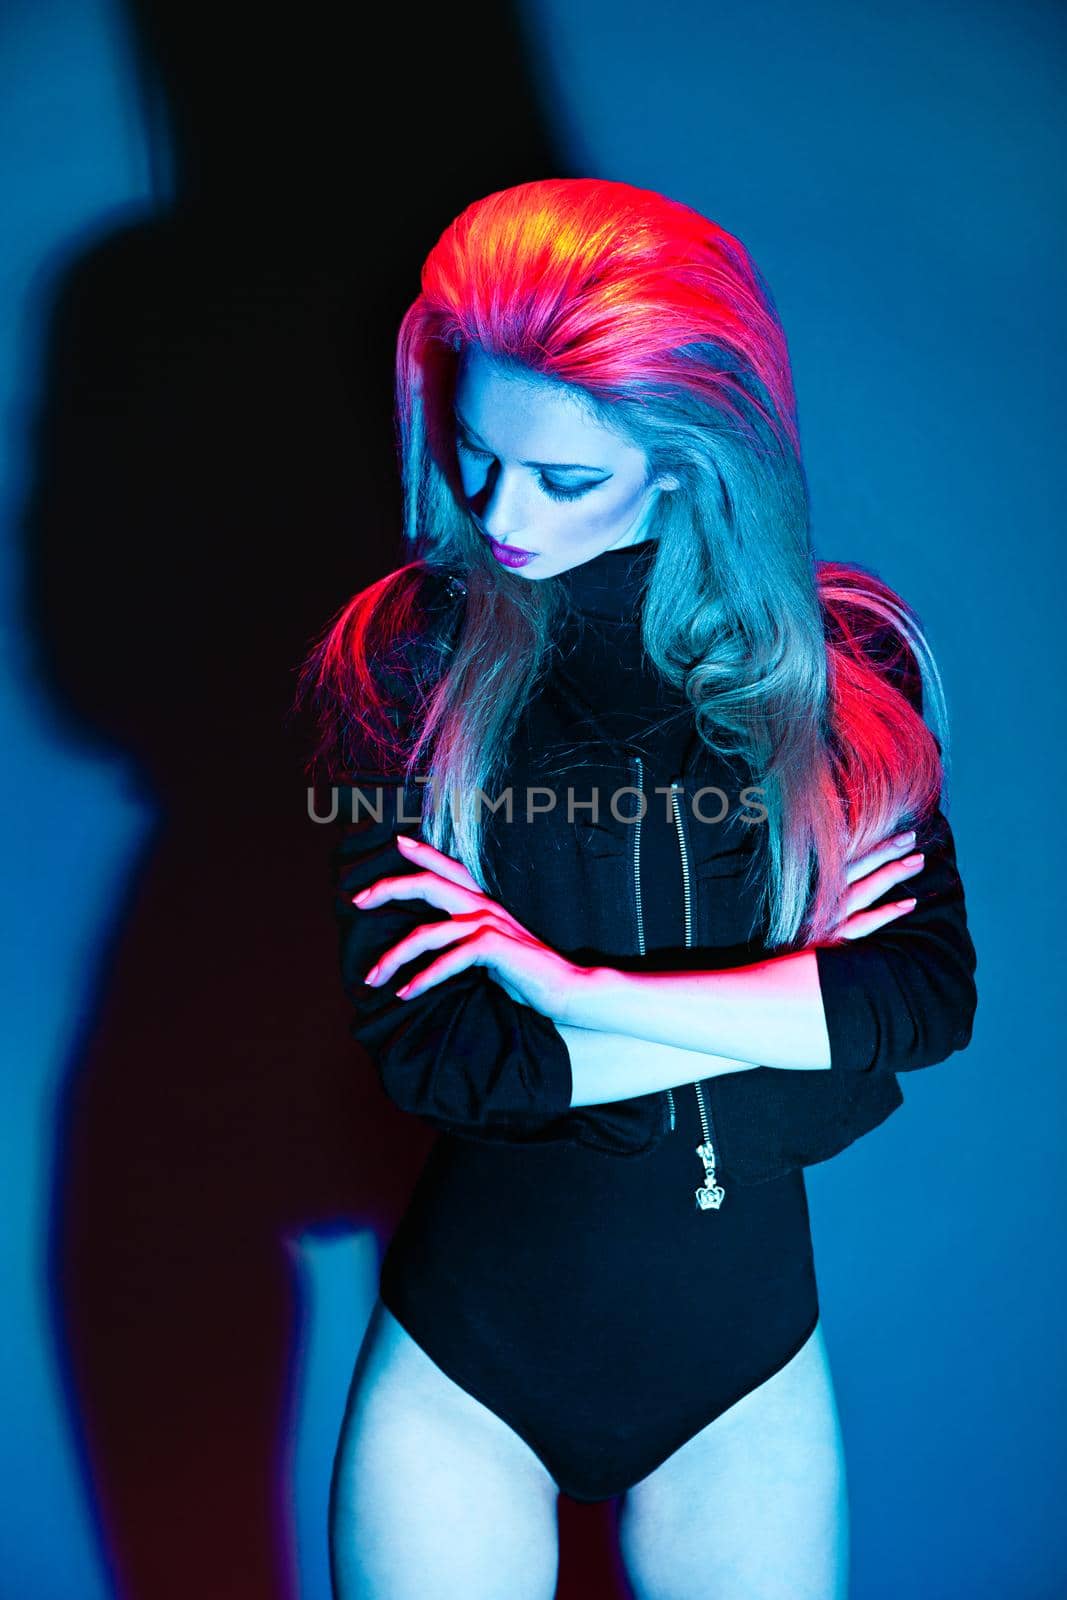 Fashion colorful shot of woman in leather jacket